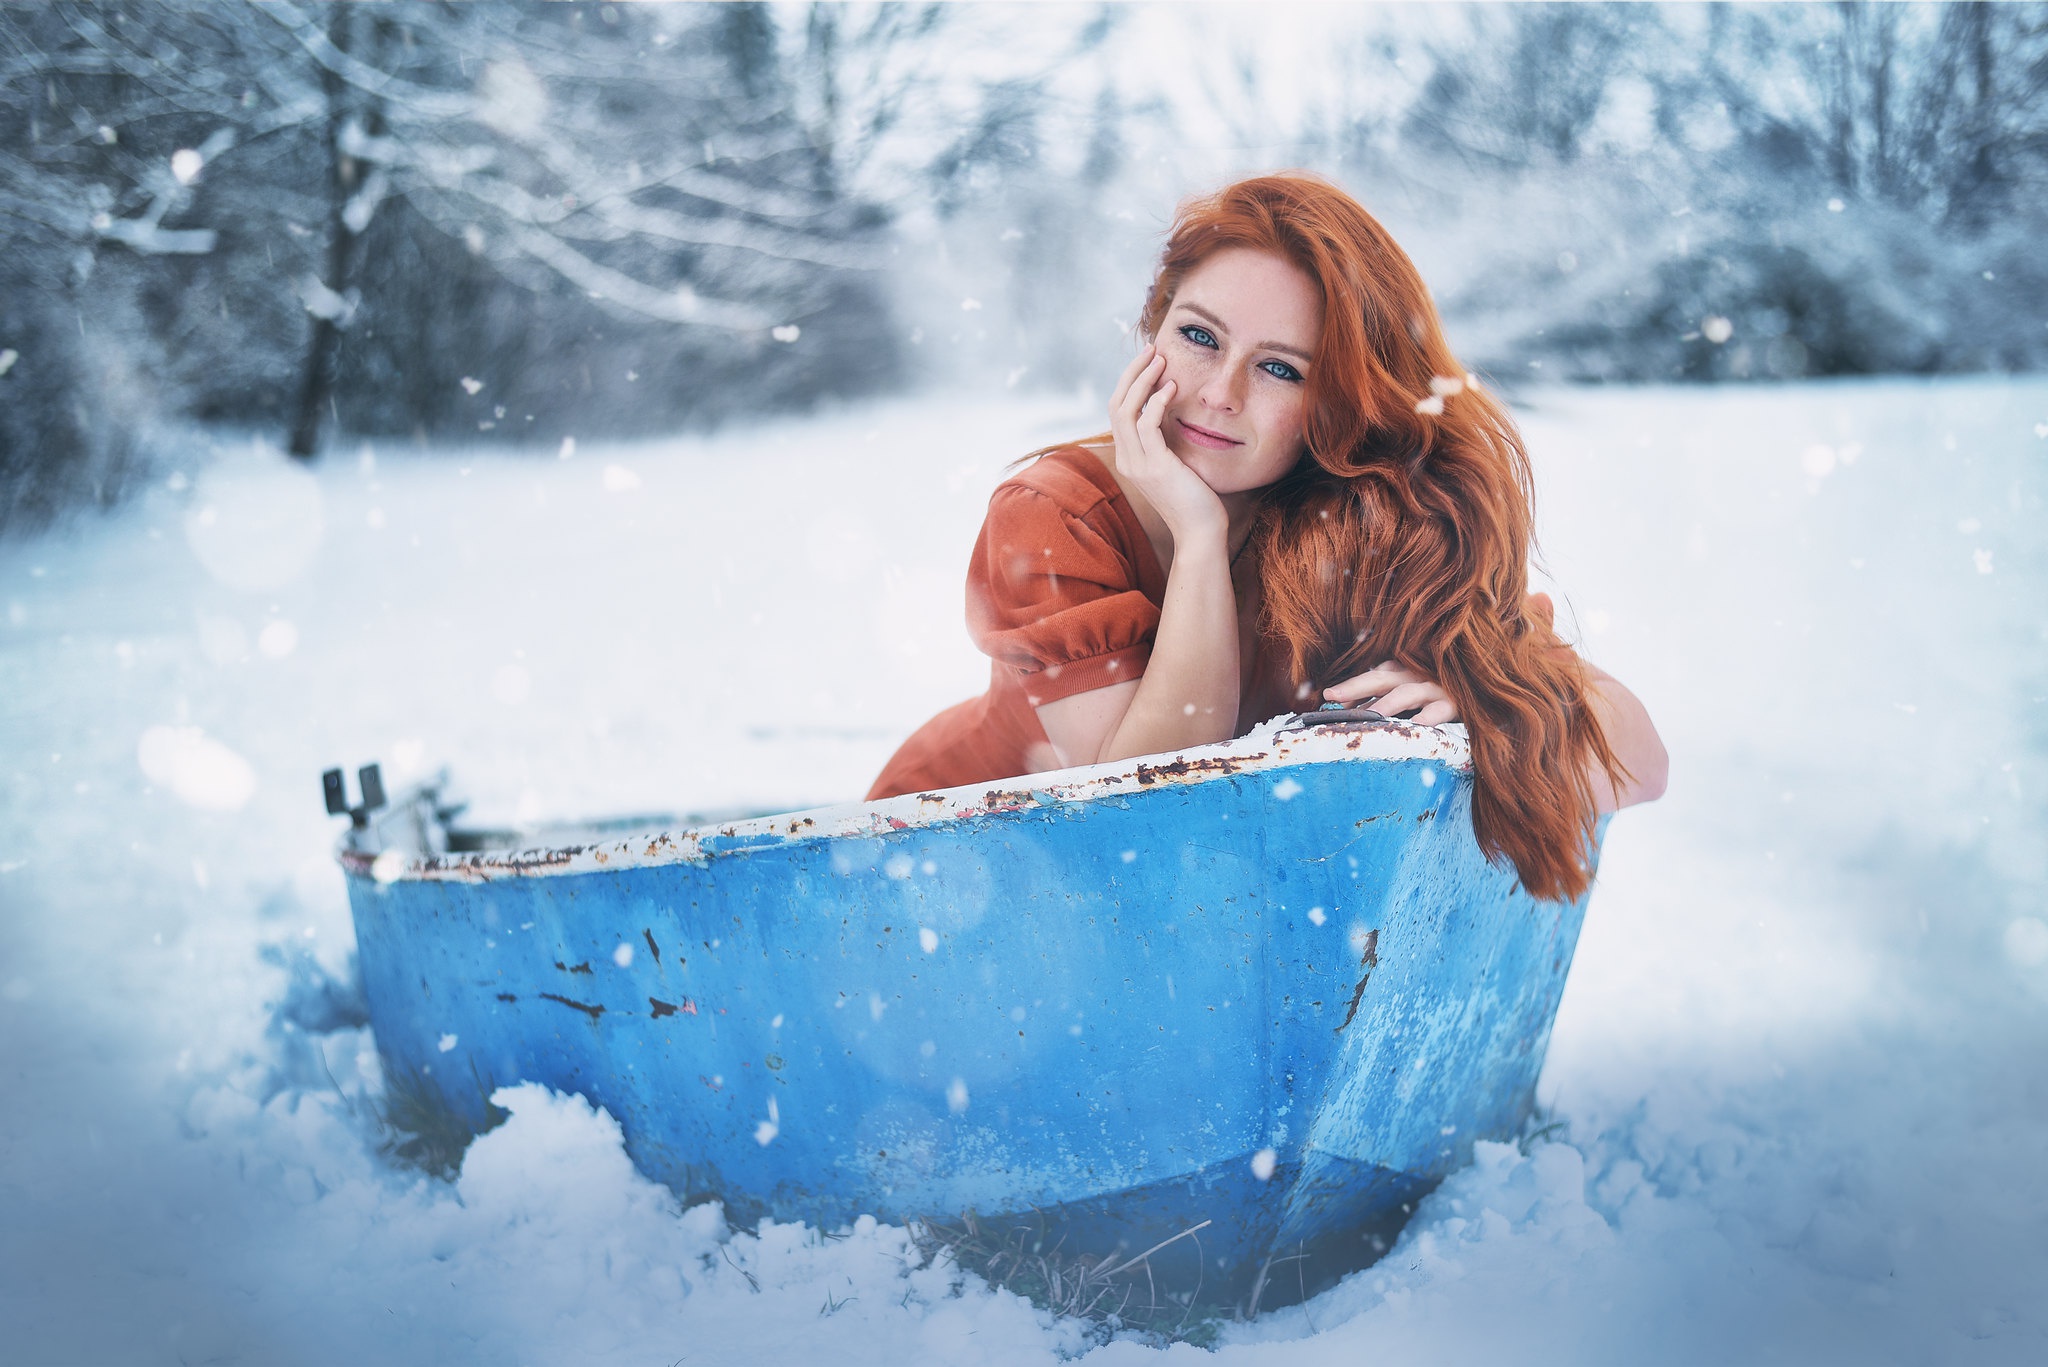 Women Model Boat Vehicle Redhead Winter Snow Cold Outdoors Women Outdoors Looking At Viewer 2048x1367